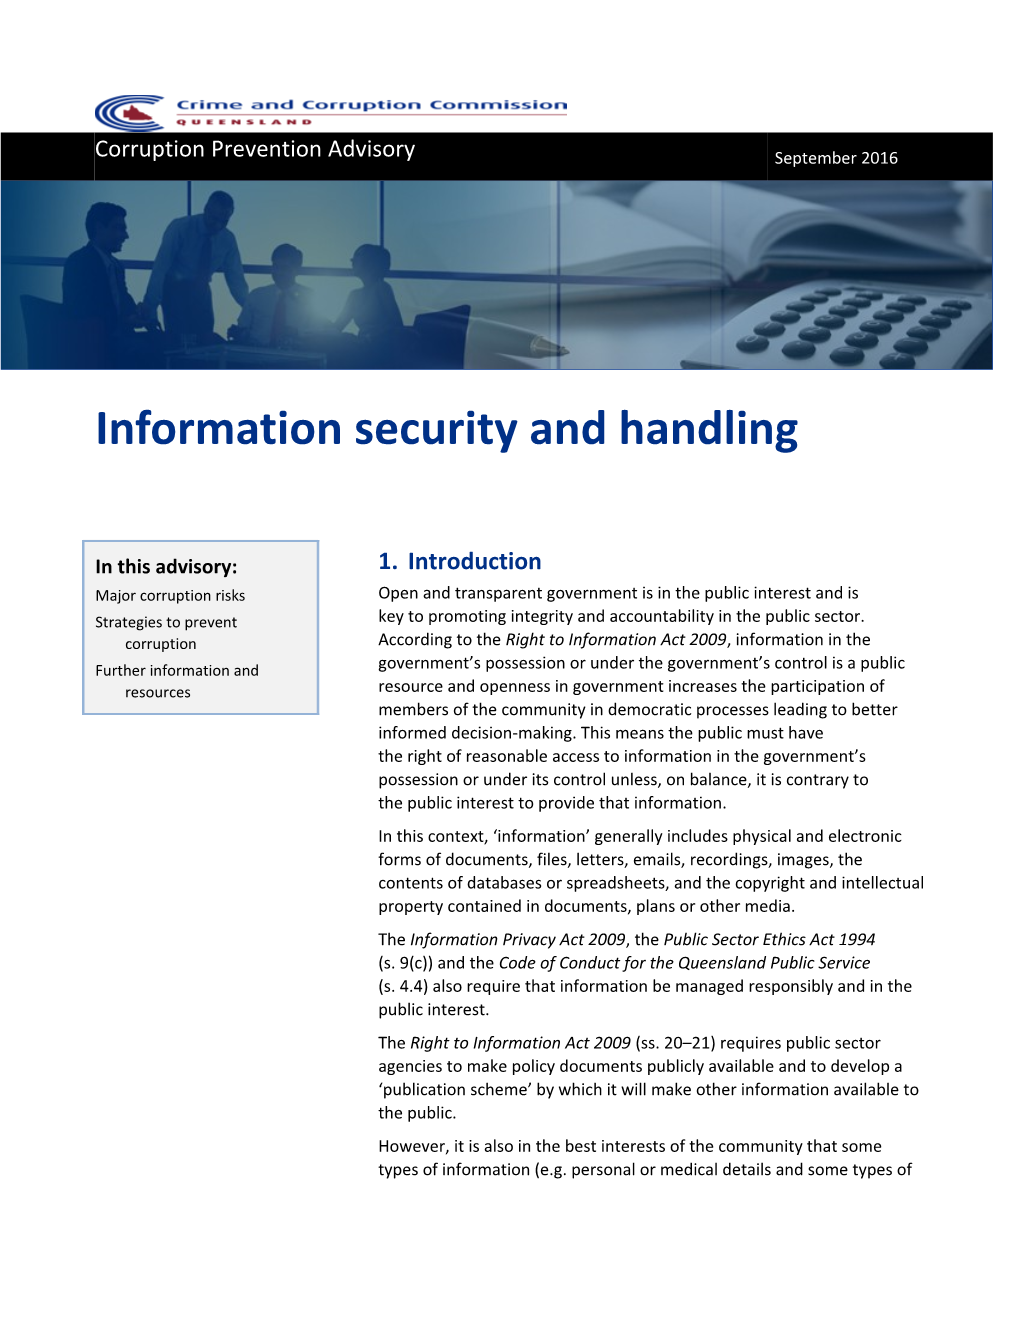 Information Security and Handling